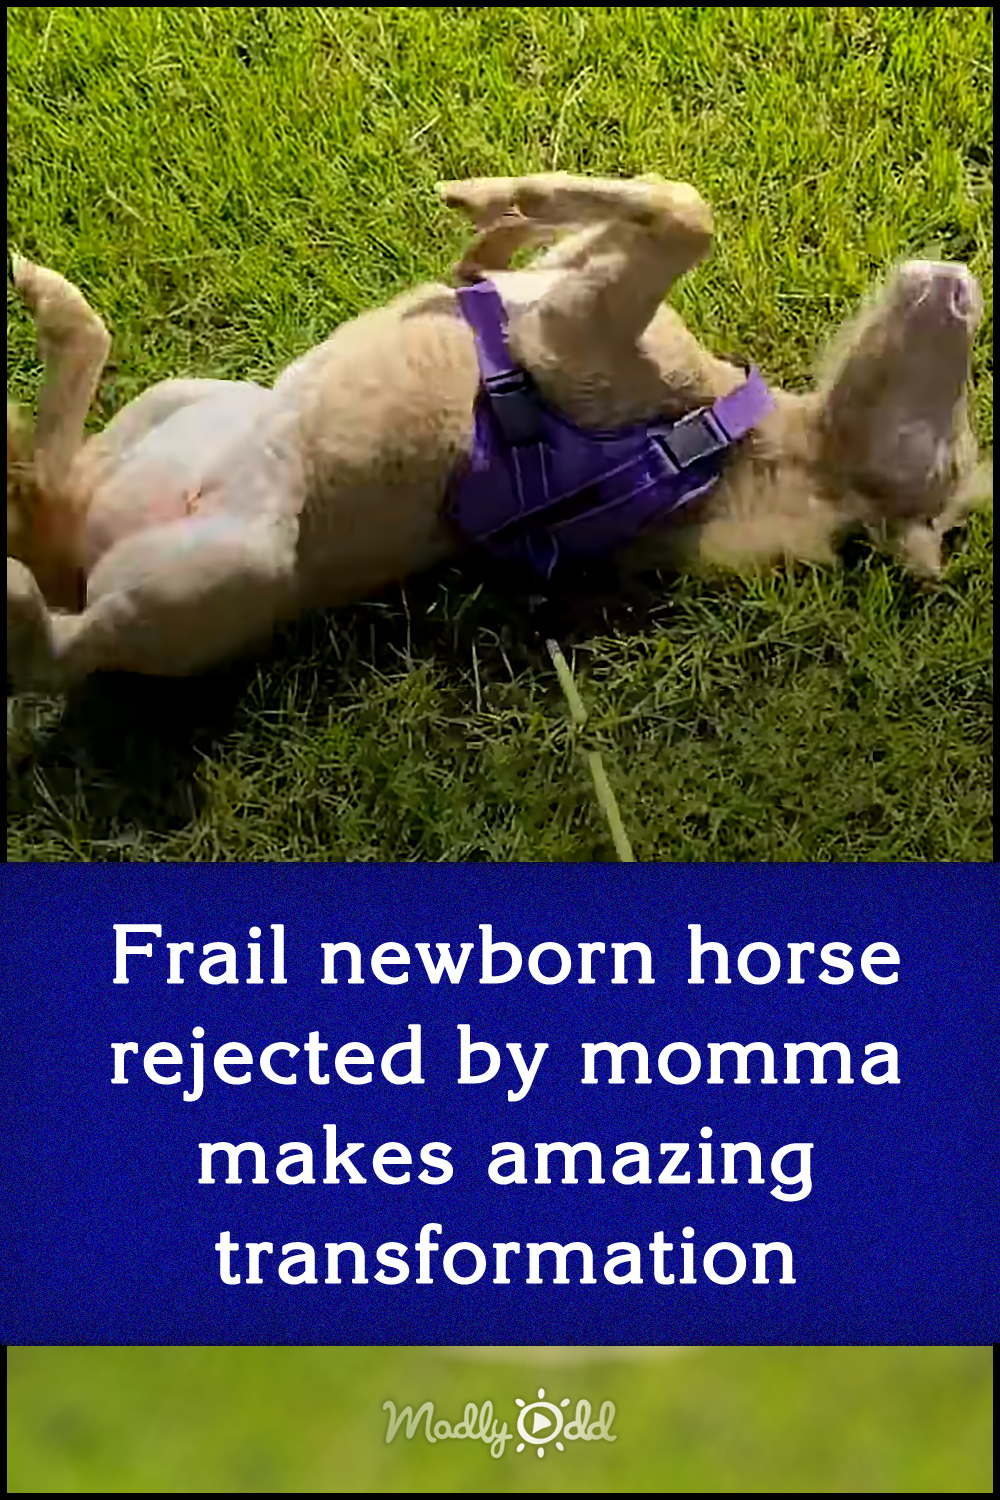 Frail newborn horse rejected by momma makes amazing transformation